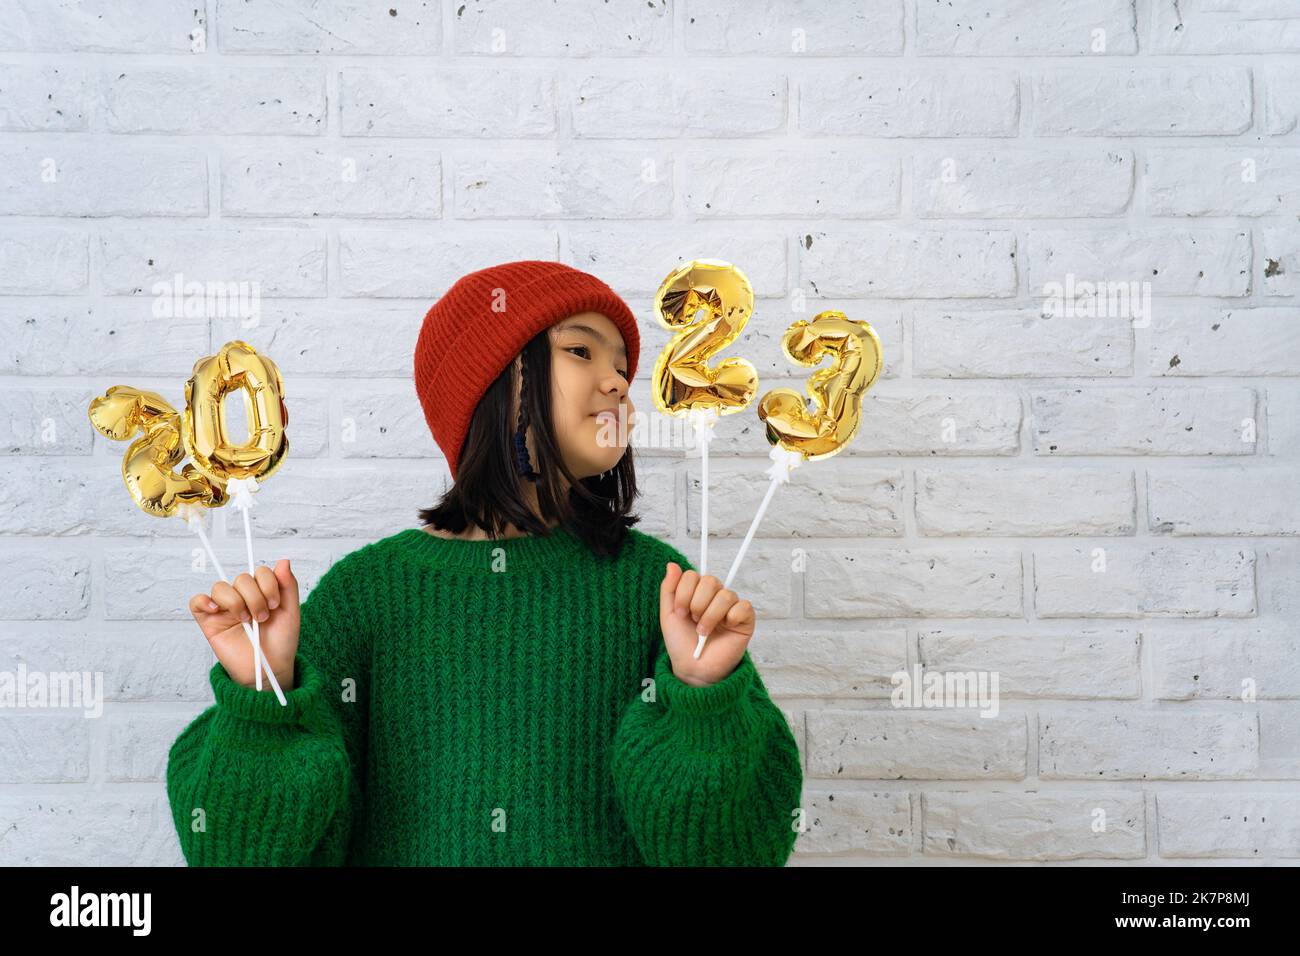 Asian cute girl in red cap and green sweater holding foil balloons with numbers 2023. Copy space, brick white wall background, face turned to the side Stock Photo